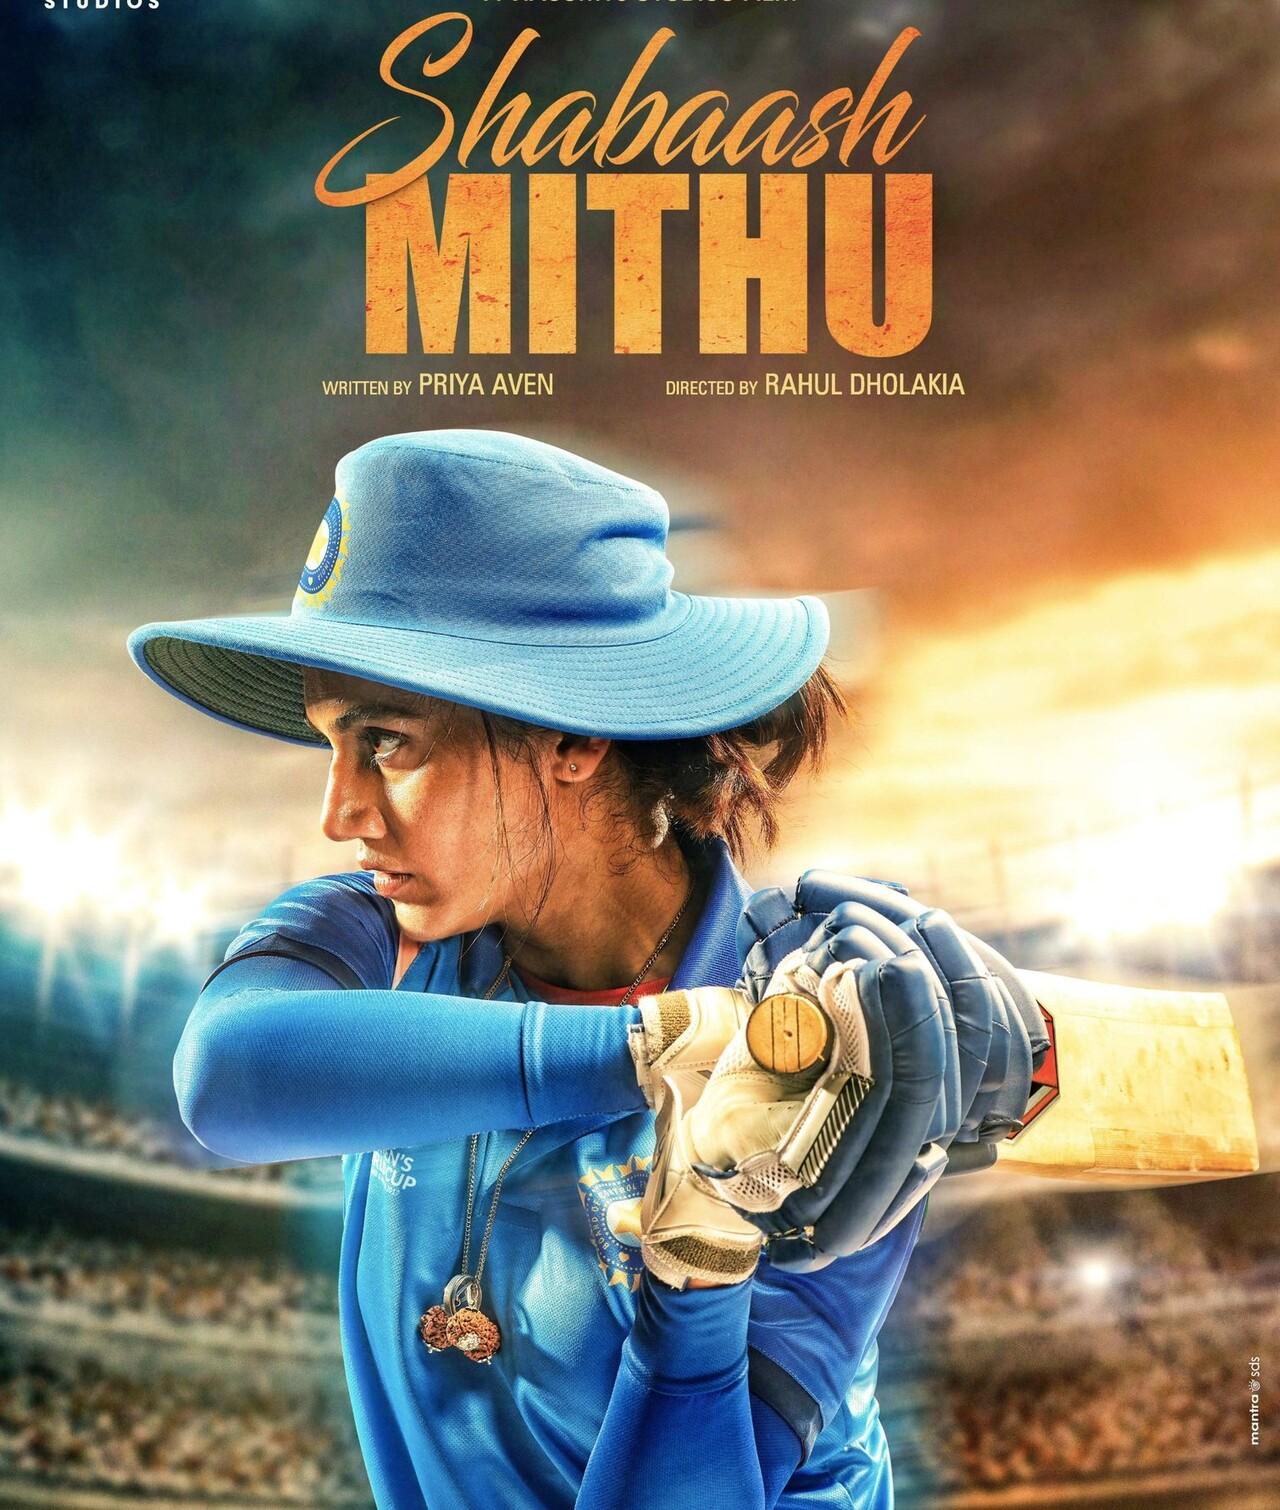 'Sabaash Mithu' is a biopic of former Indian women’s cricket team captain Mithali. The movie stars Taapsee Pannu in the role of Mithali, one of the greatest female cricketers in the world